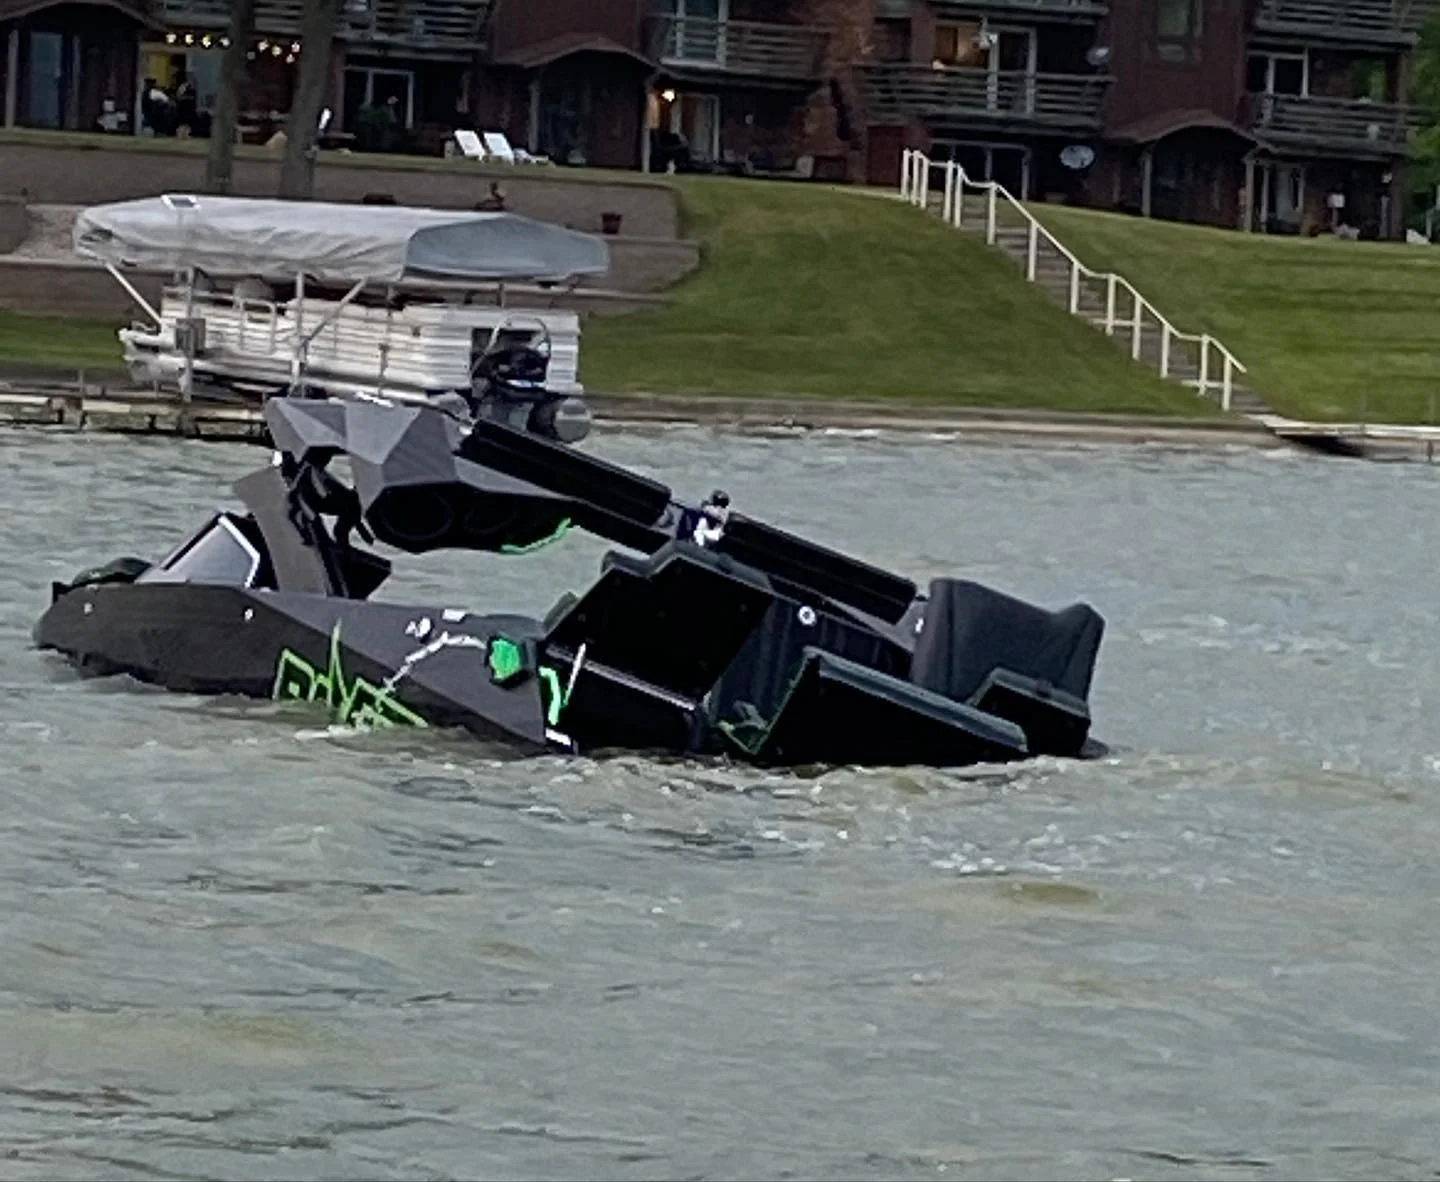 Man Sinks Boat, Then F-150 Raptor And Wrangler Trying To Save It: Video